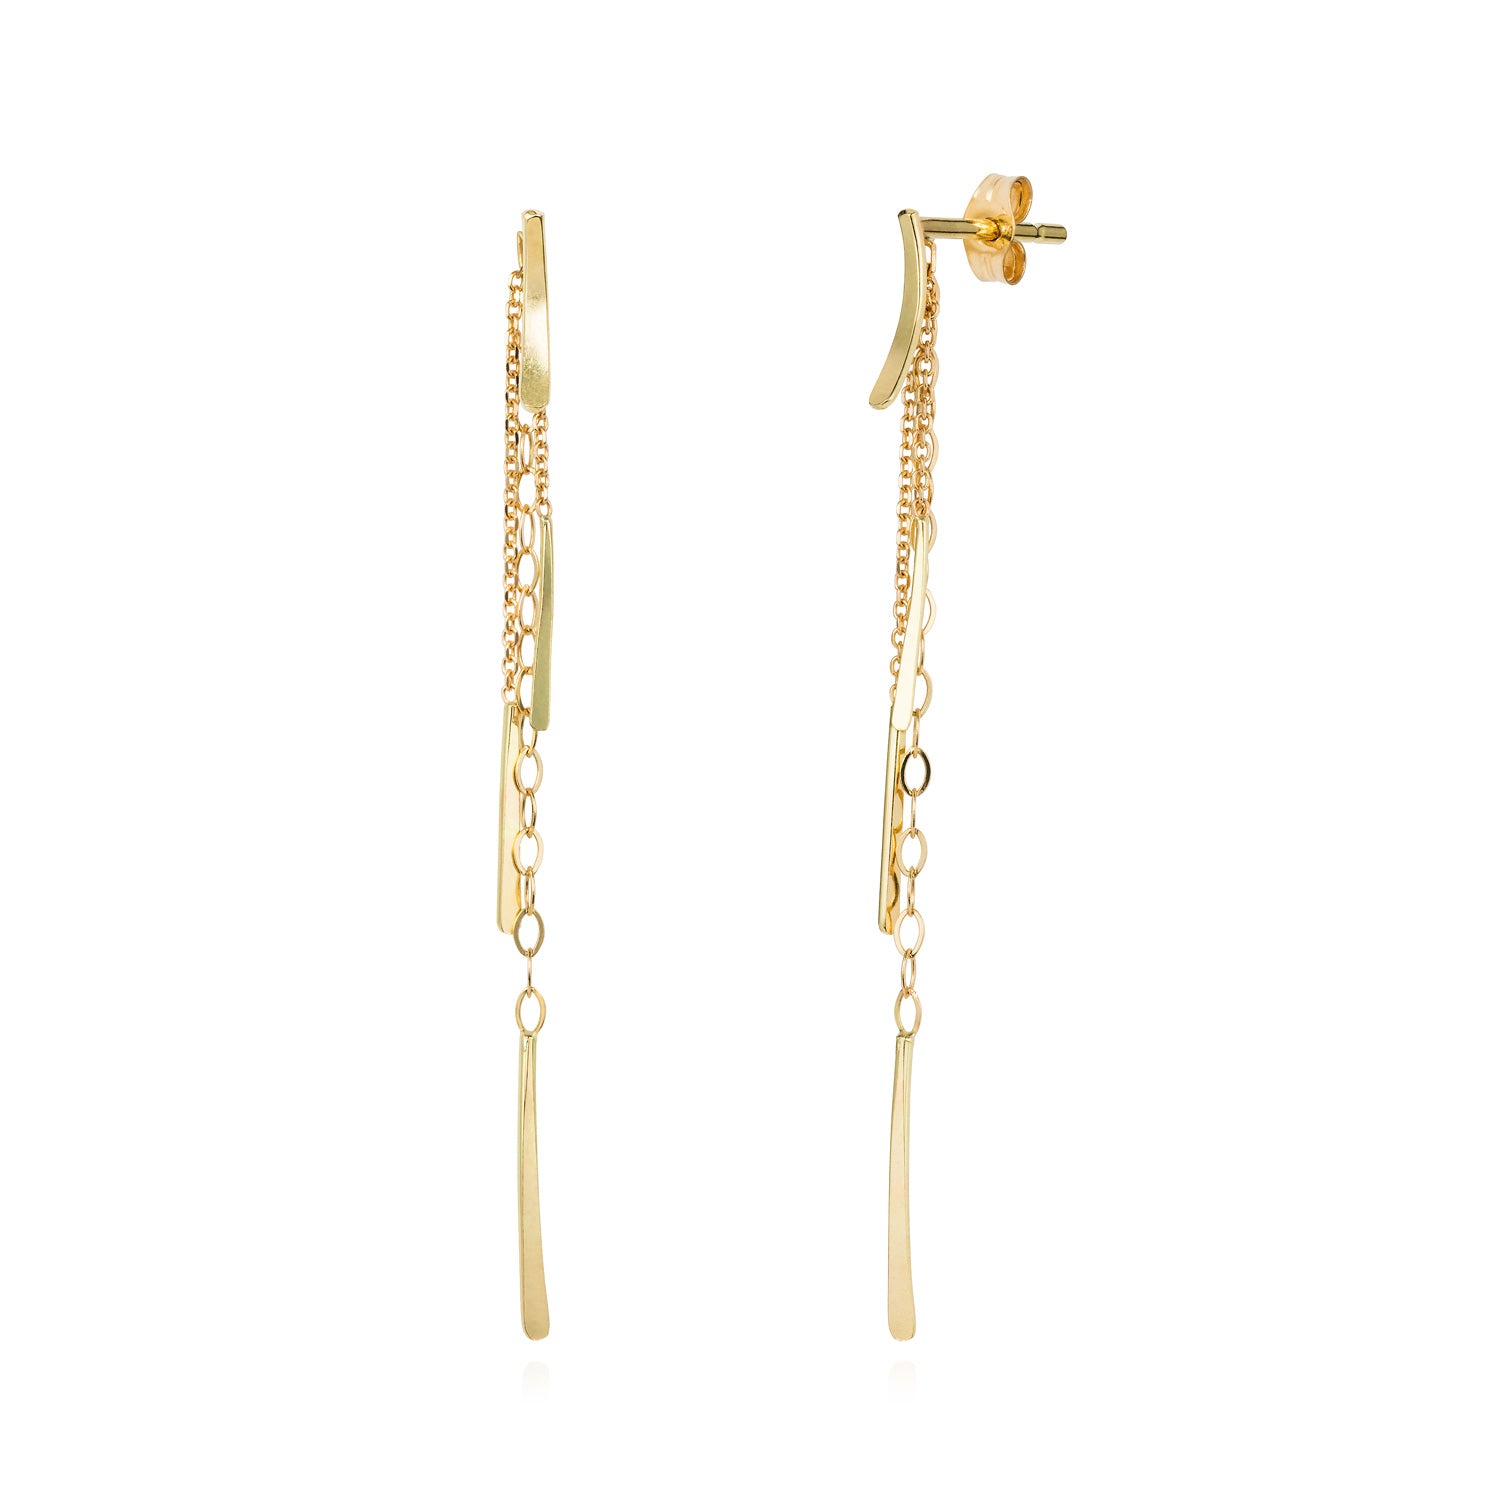 18ct yellow gold stud earring with hanging chains and bars